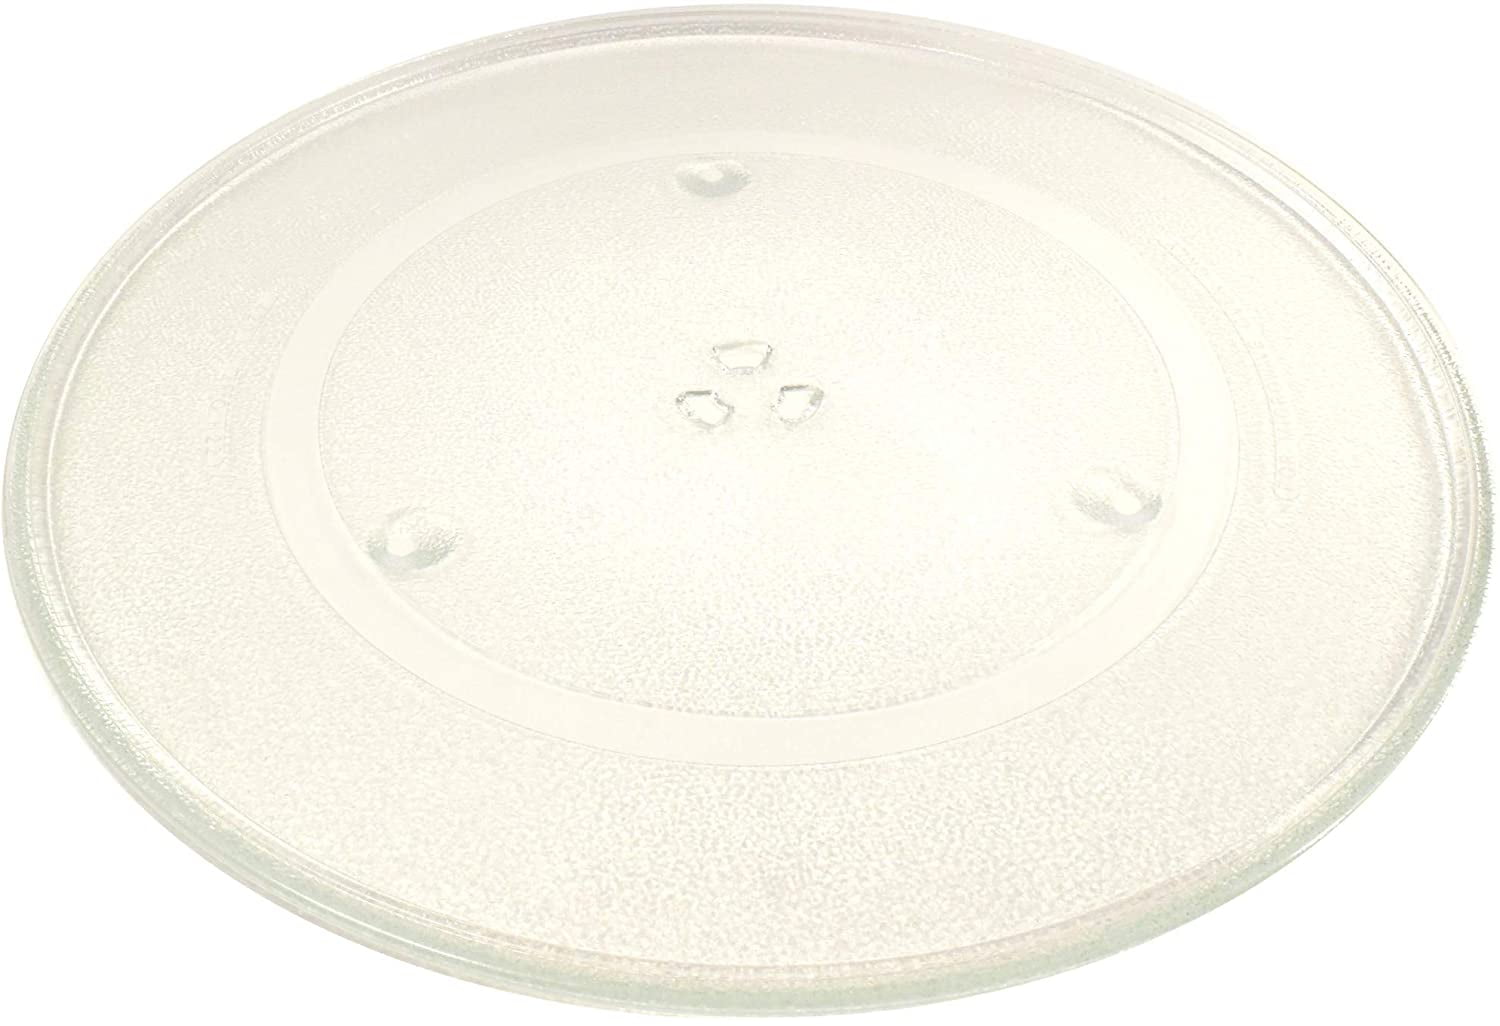 Panasonic 340mm Compatible Microwave Replacement Glass Plate Turntable 